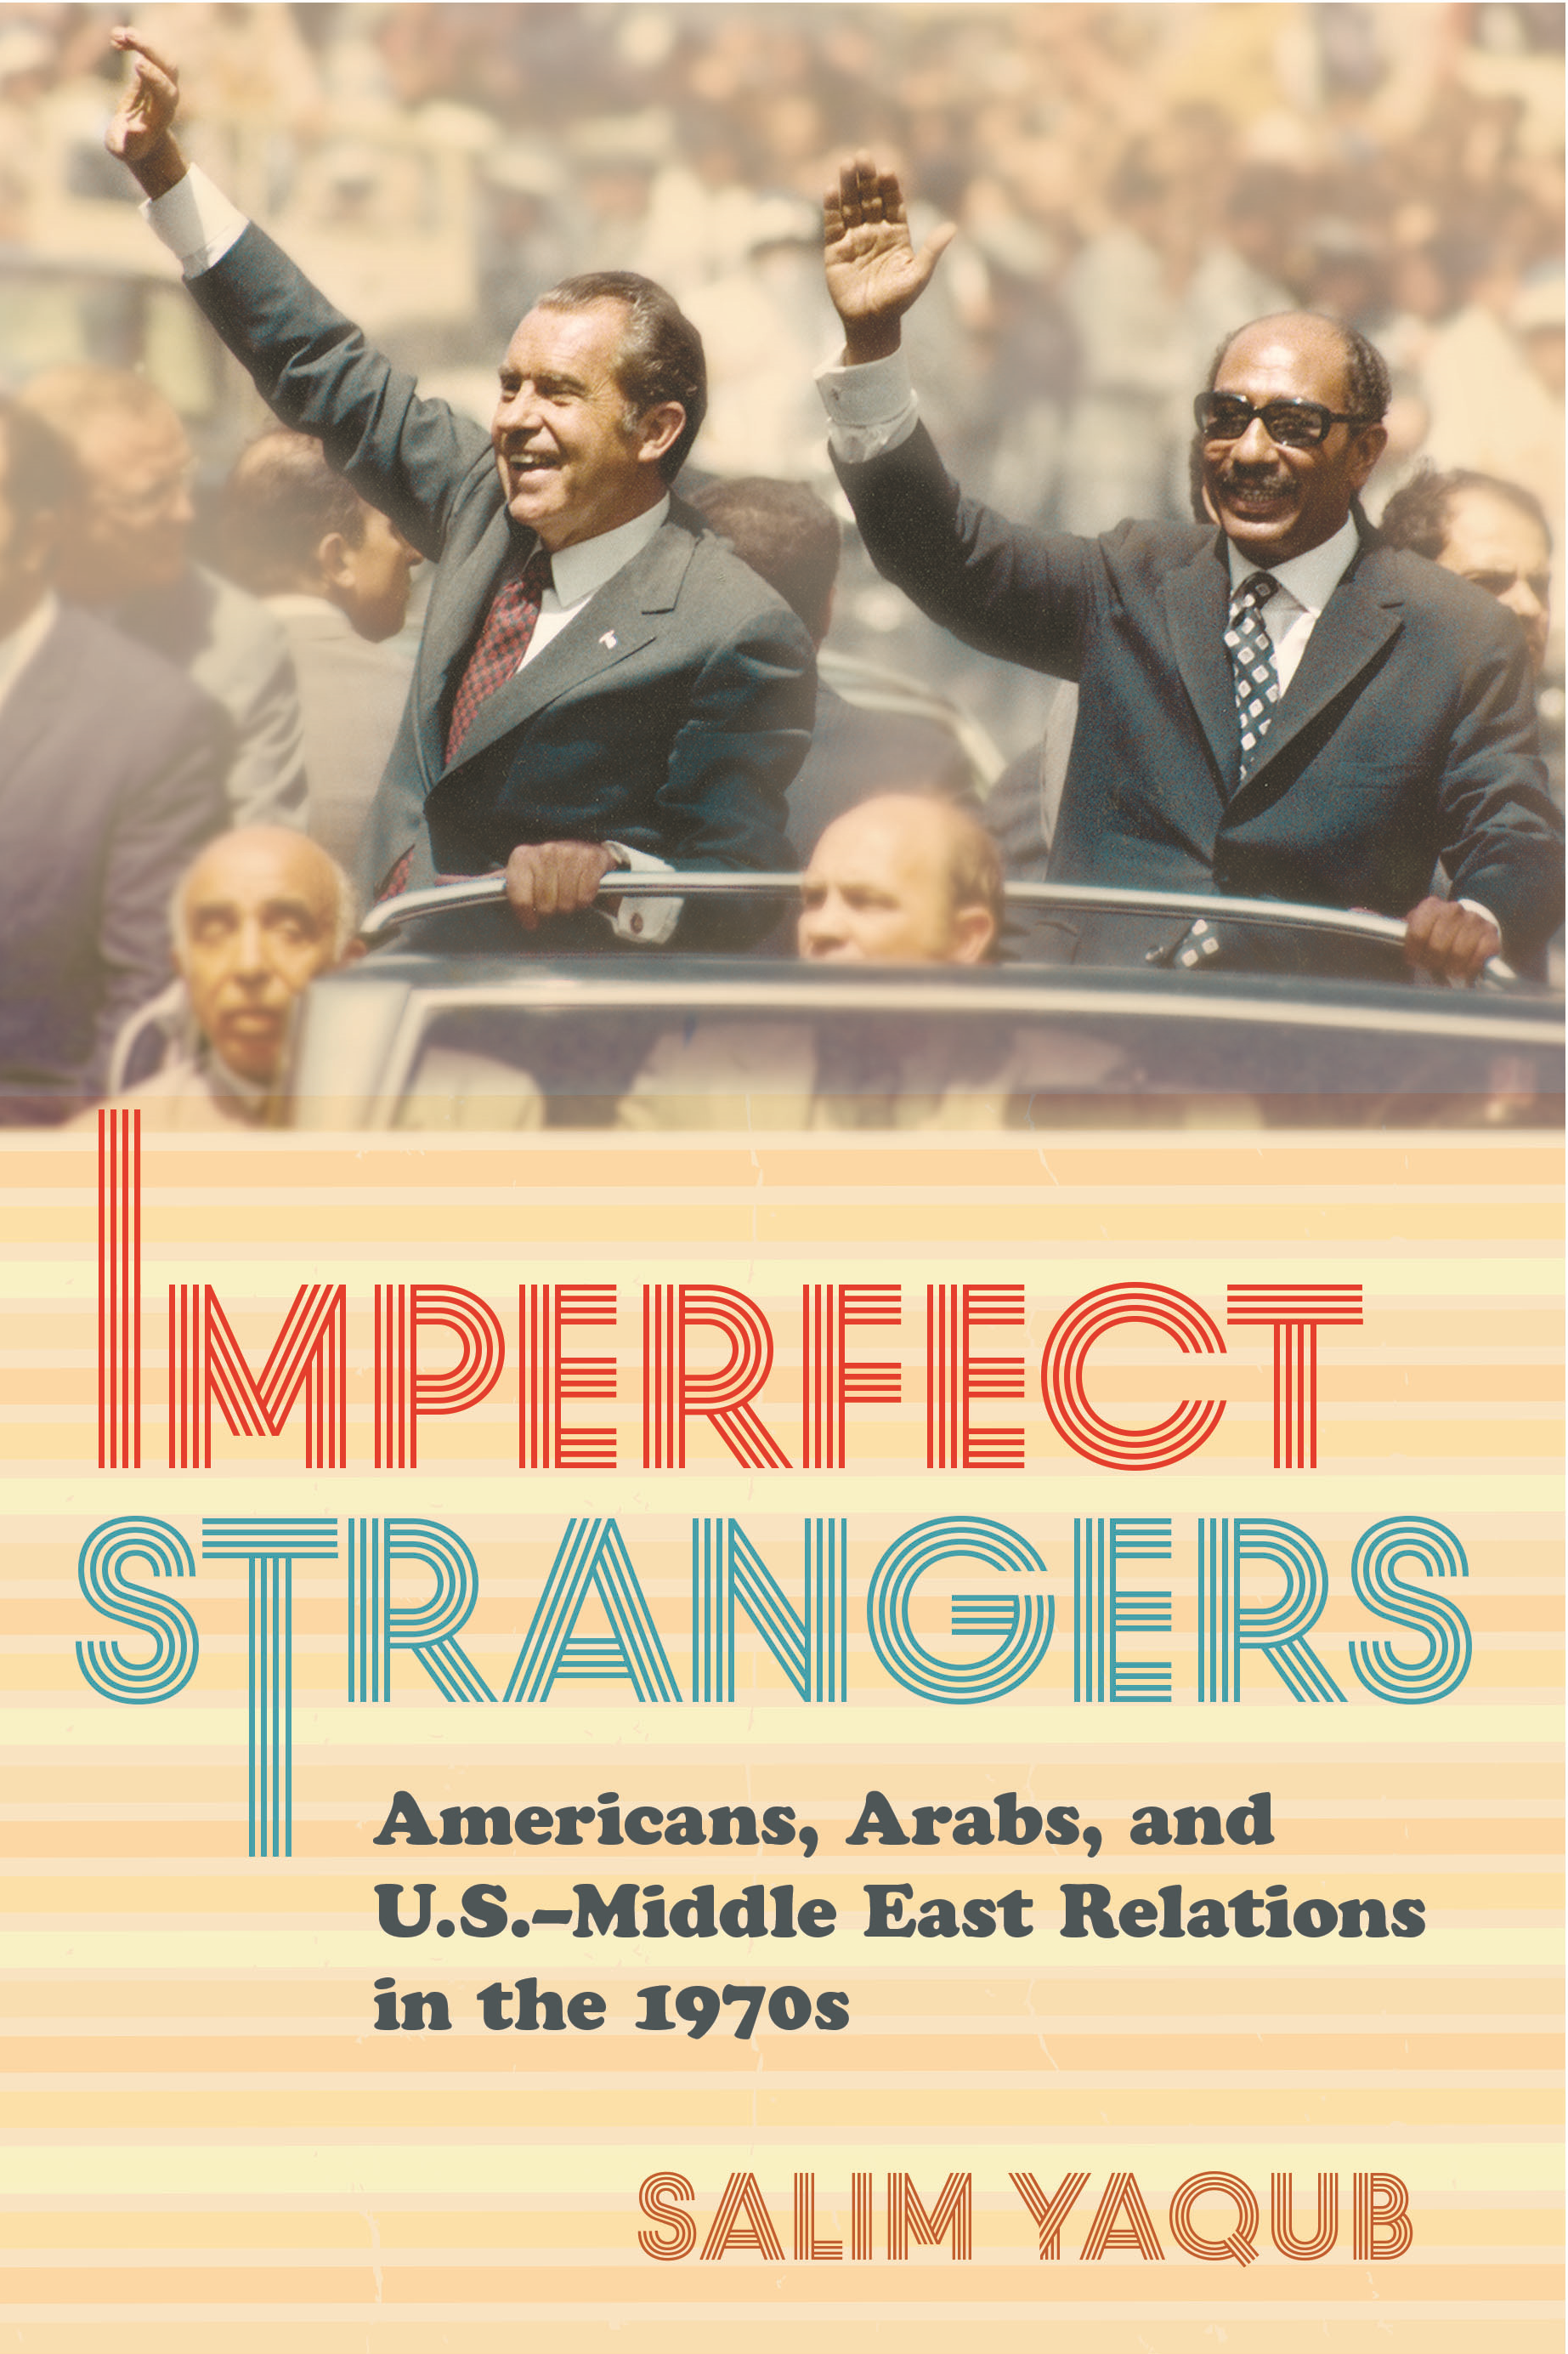 bookcover of Salim Yaqub's Imperfect Strangers Americans, Arabs, and U.S.-Middle East relations in the 1970s